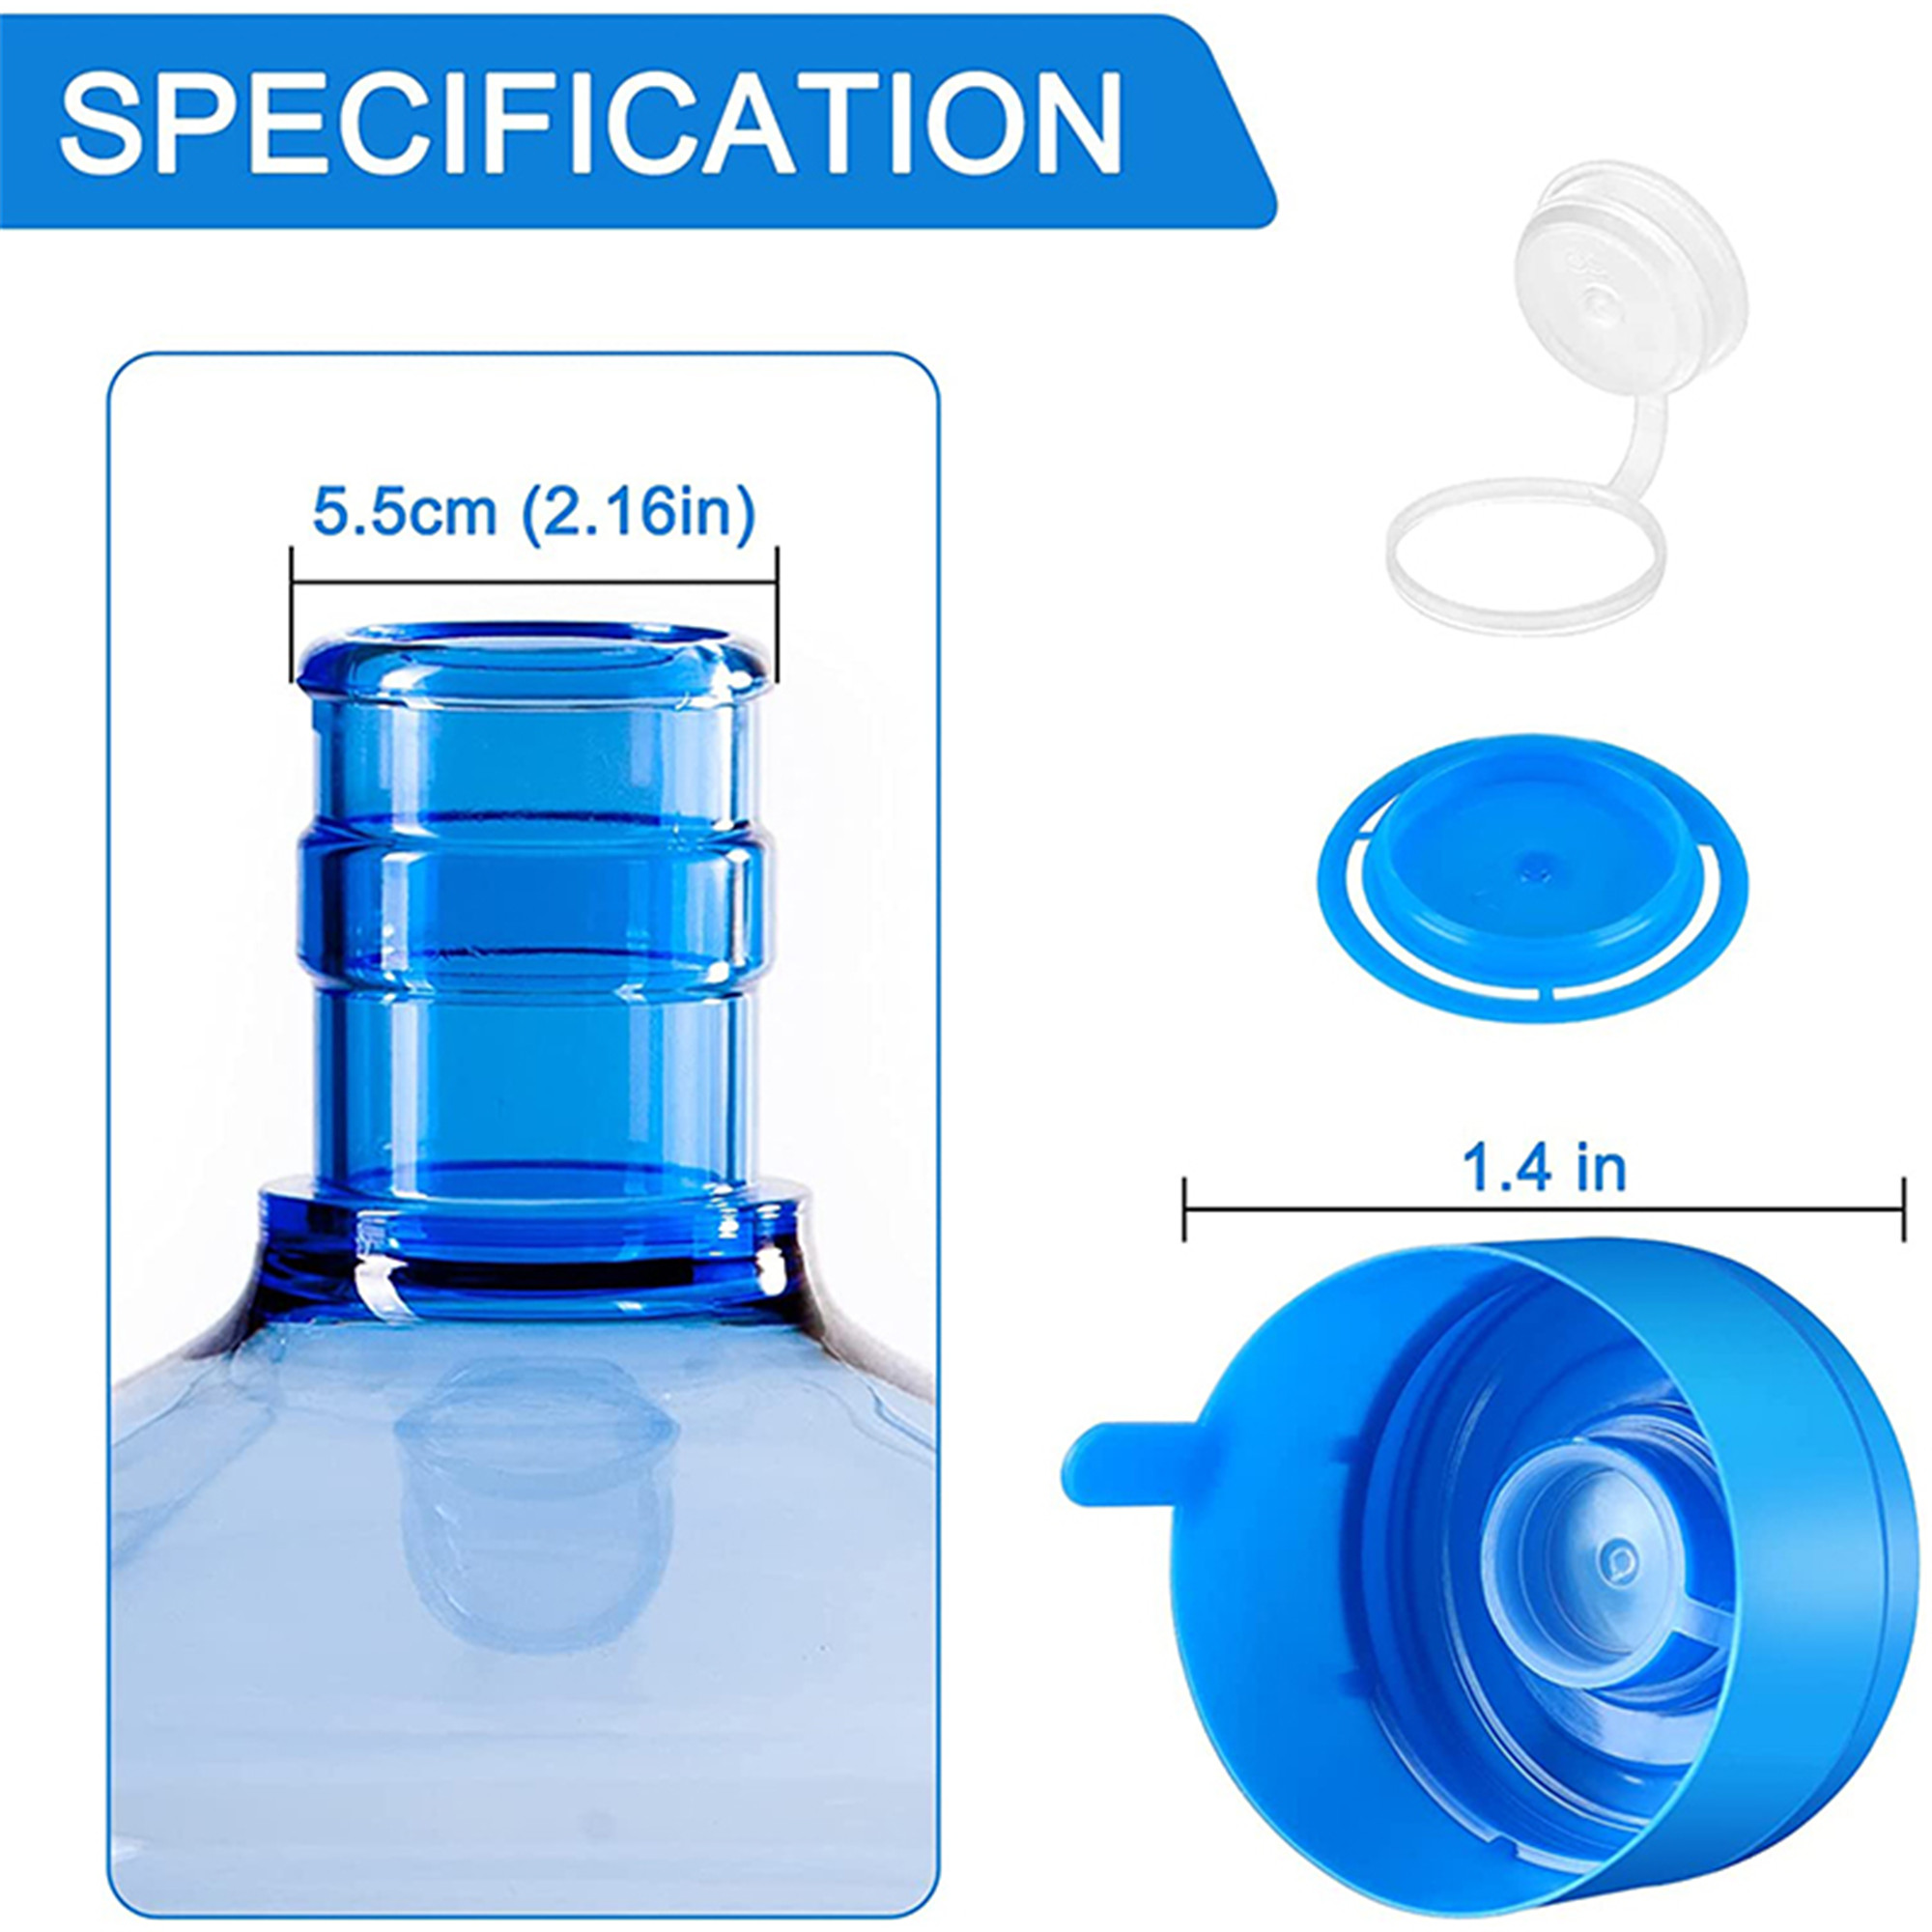 Universal Silicone Water Jug Cap Fits for 15-20L Water Bottle Top Lid Cover  New